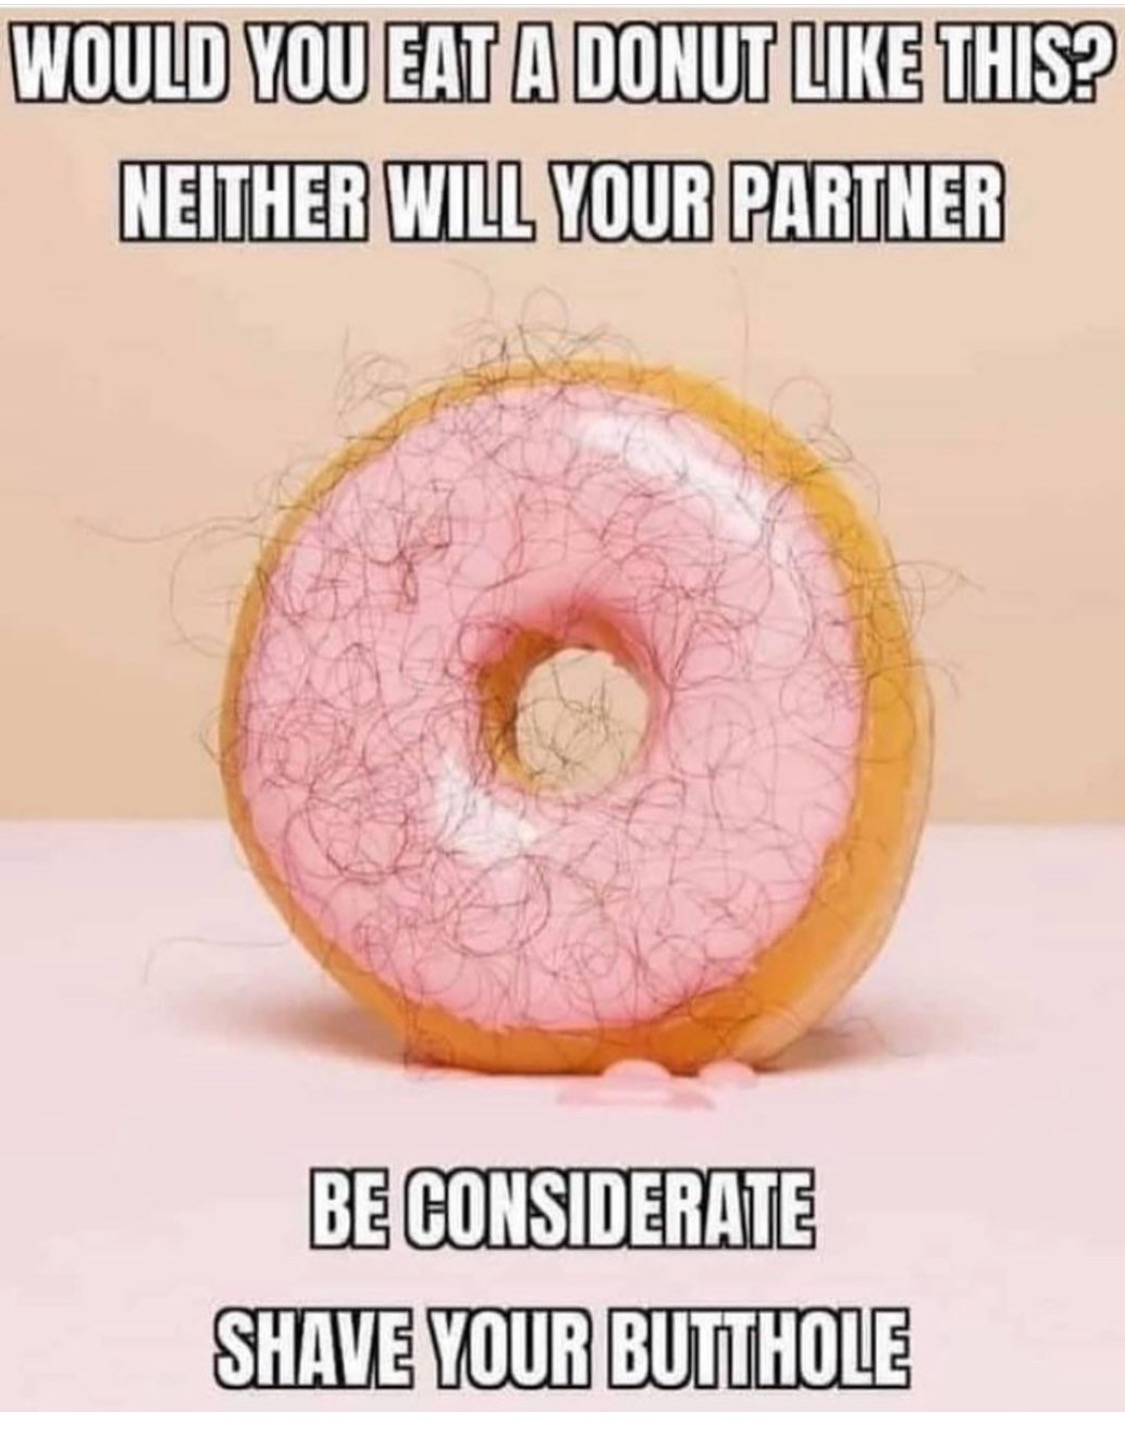 eye - Would You Eat A Donut This? Neither Will Your Partner Be Considerate Shave Your Butthole